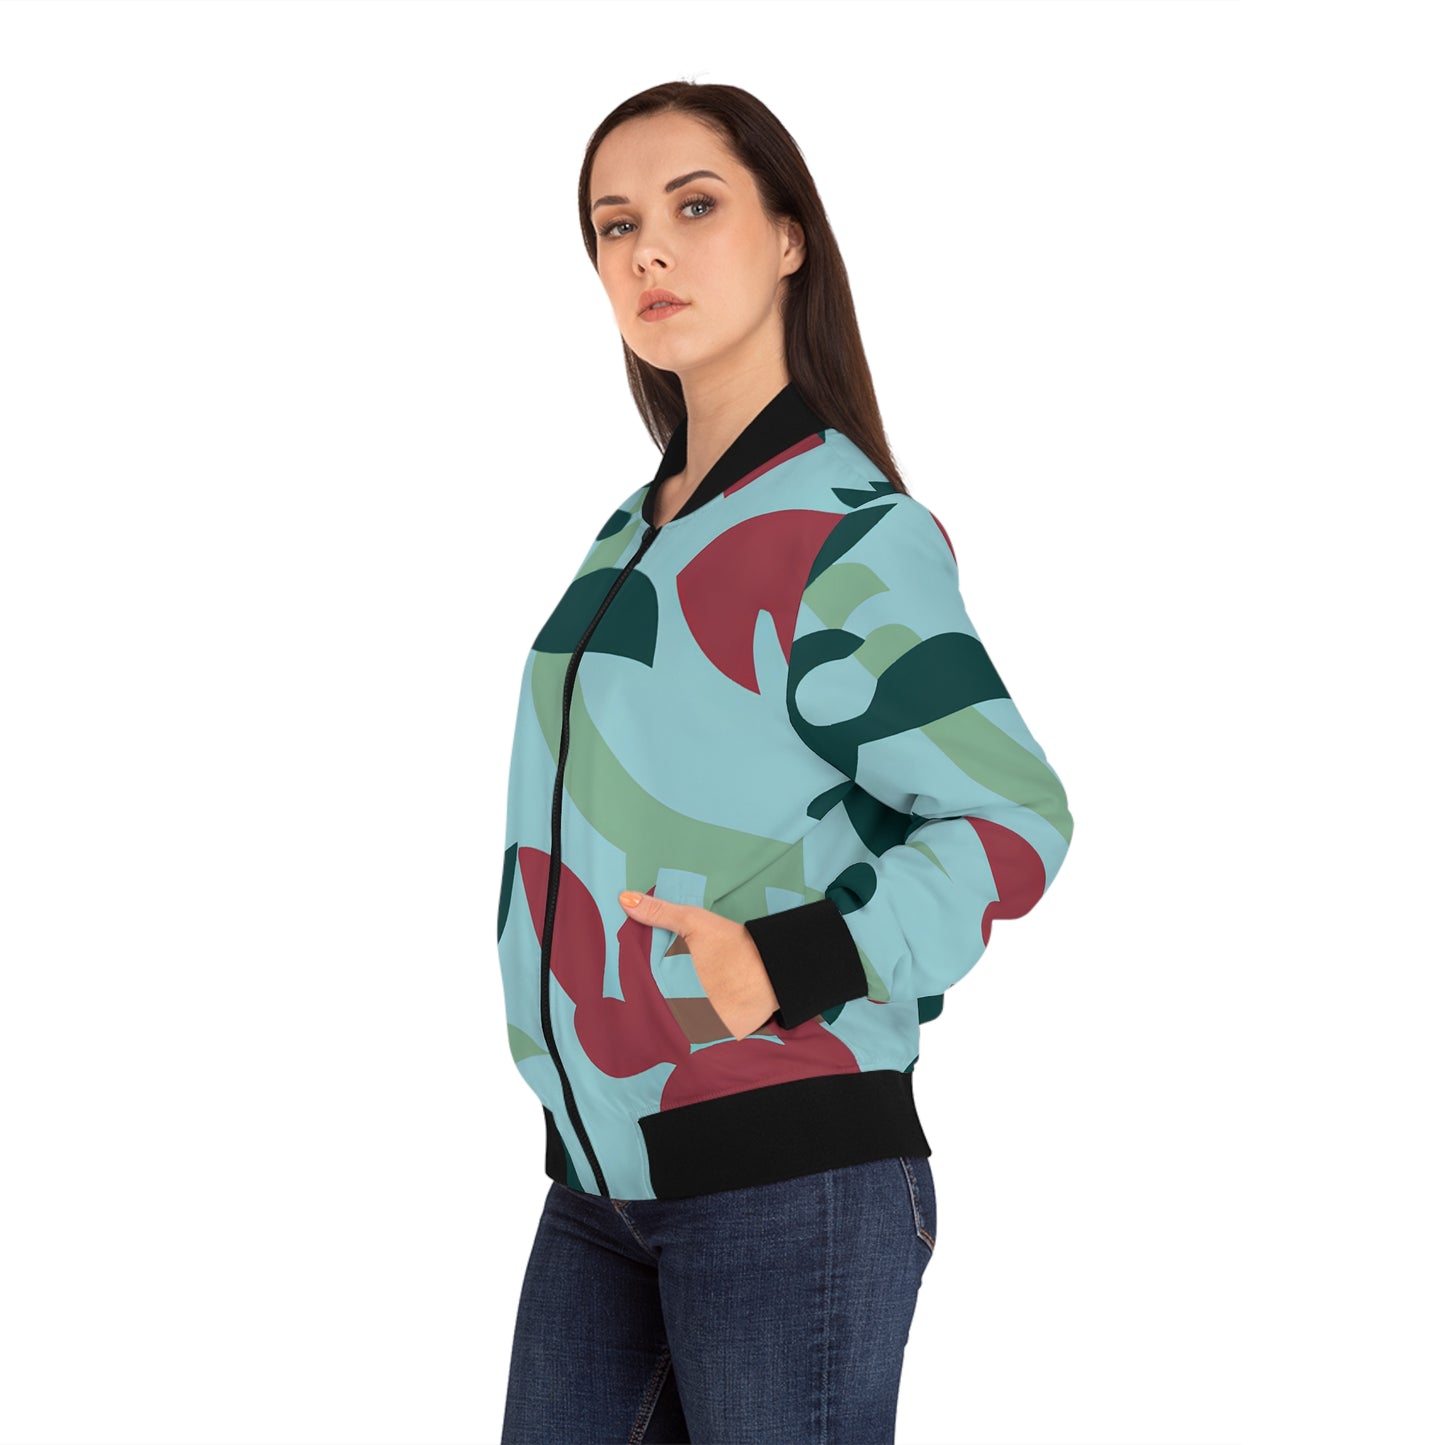 Chaparral Ione - Women's Bomber Jacket